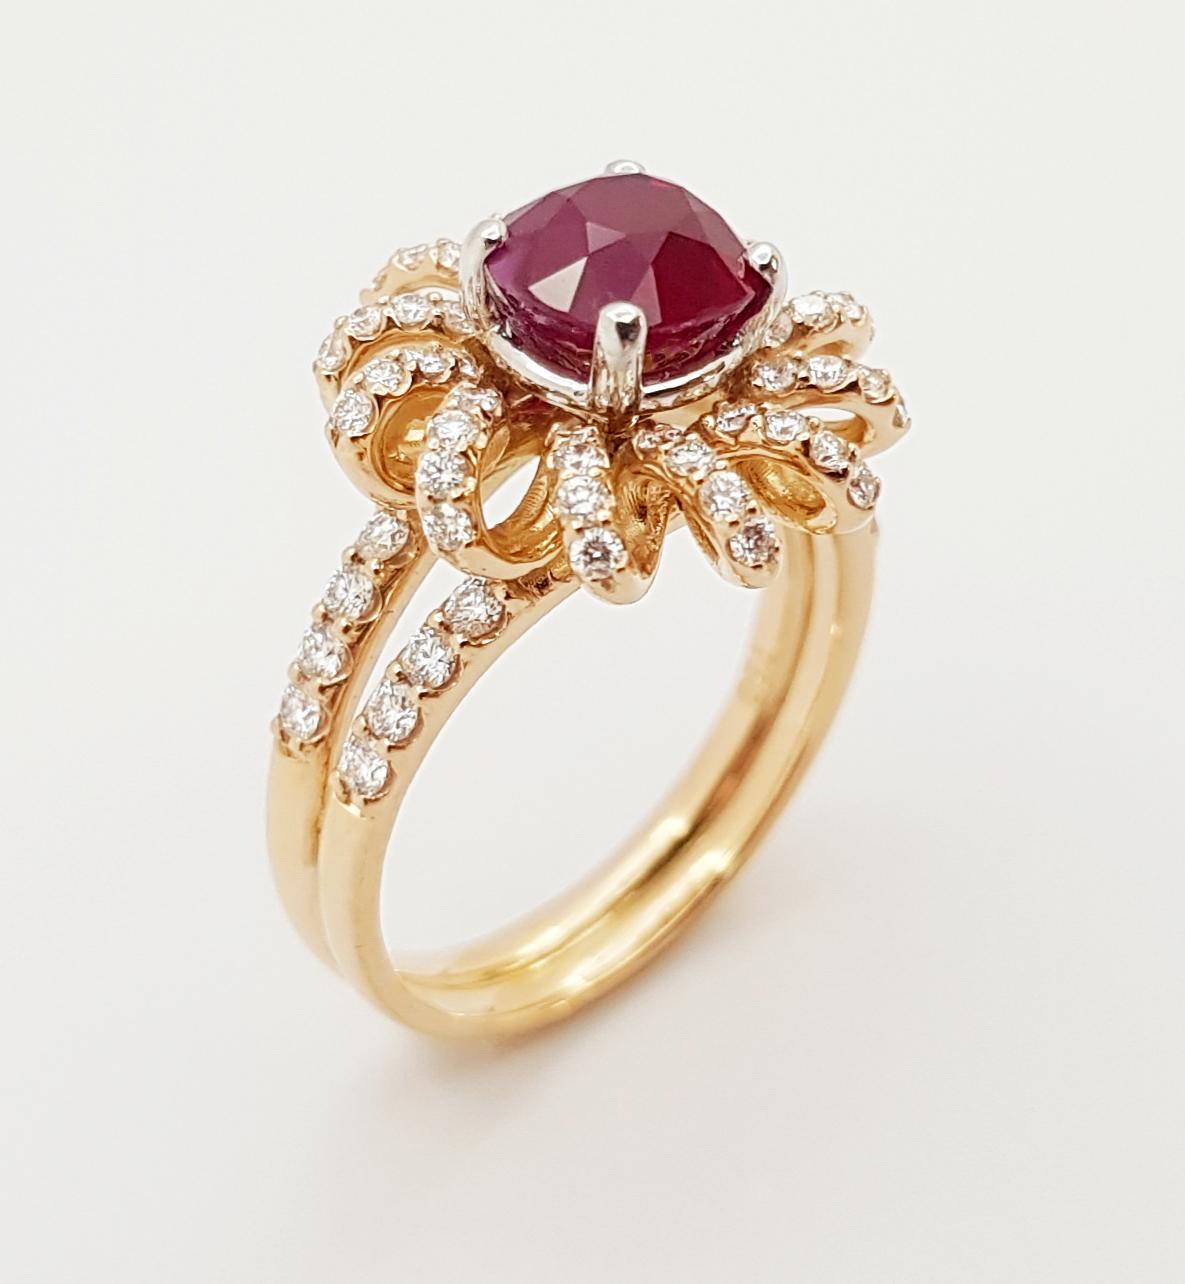 Certified Burmese Pigeon's Blood Ruby with Diamond Ring Set in 18K Rose Gold For Sale 4